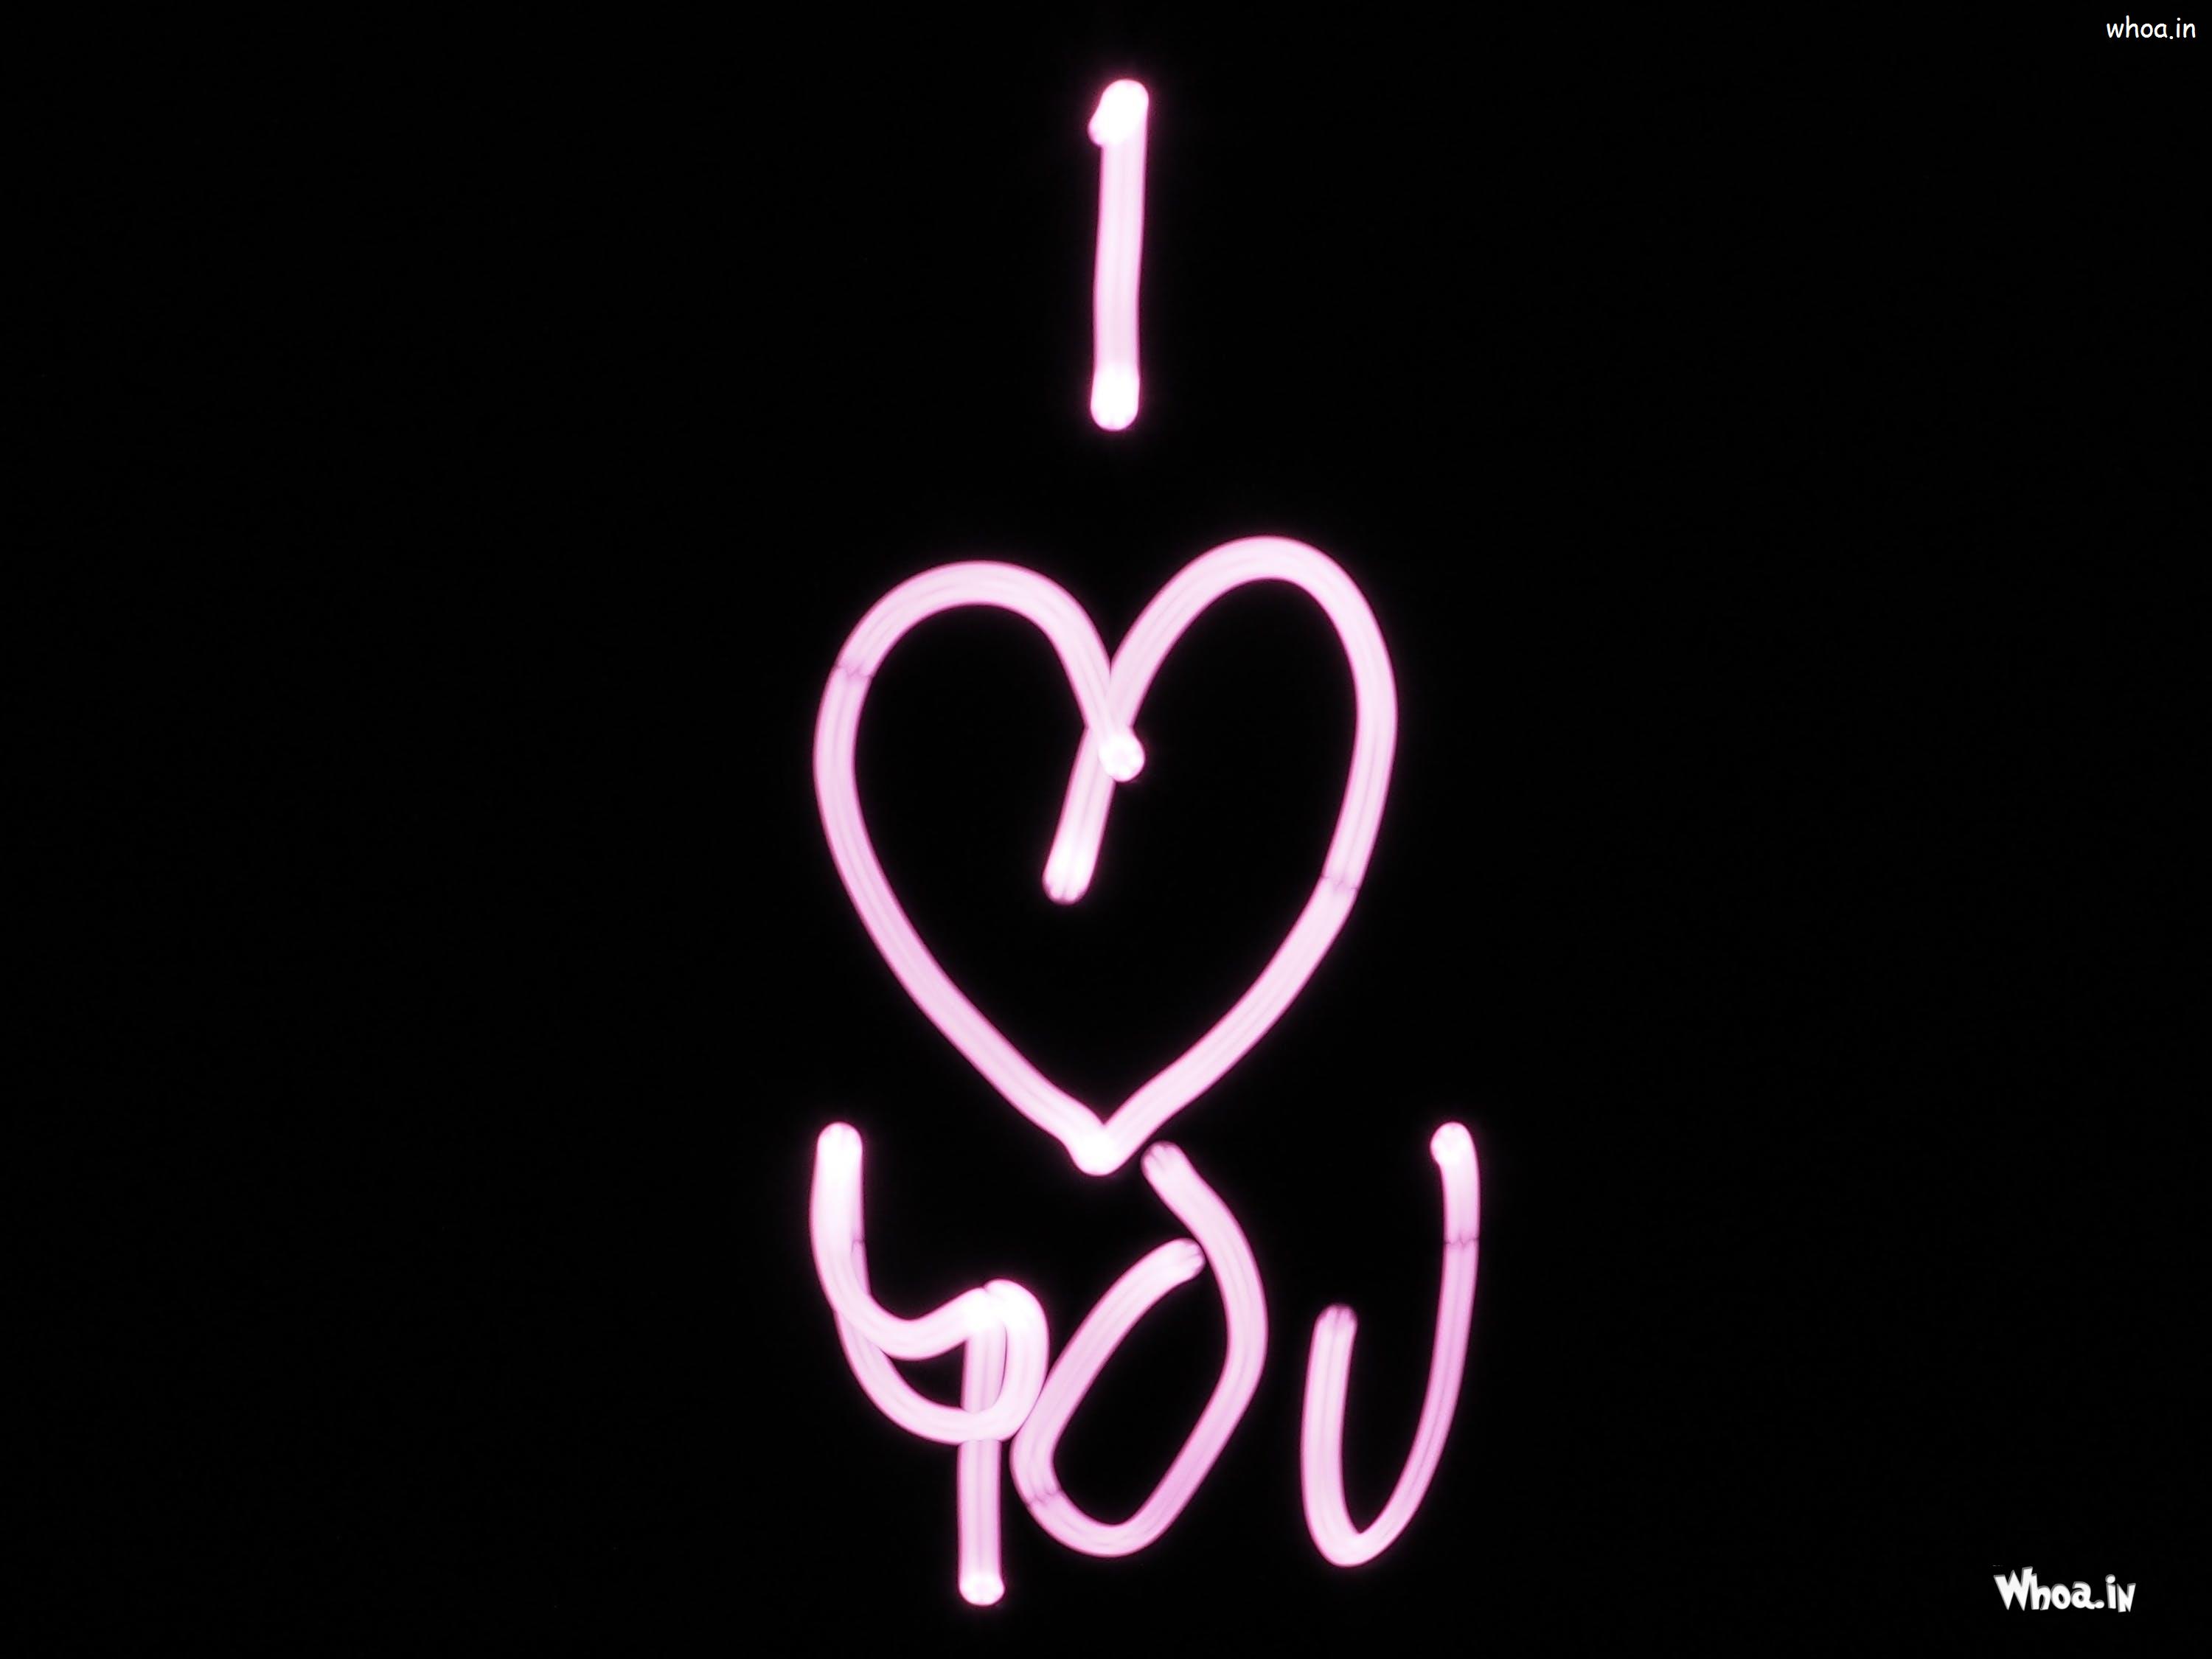 Love Photos , HD Wallpapers And Images . #4 I-Love-You Wallpaper